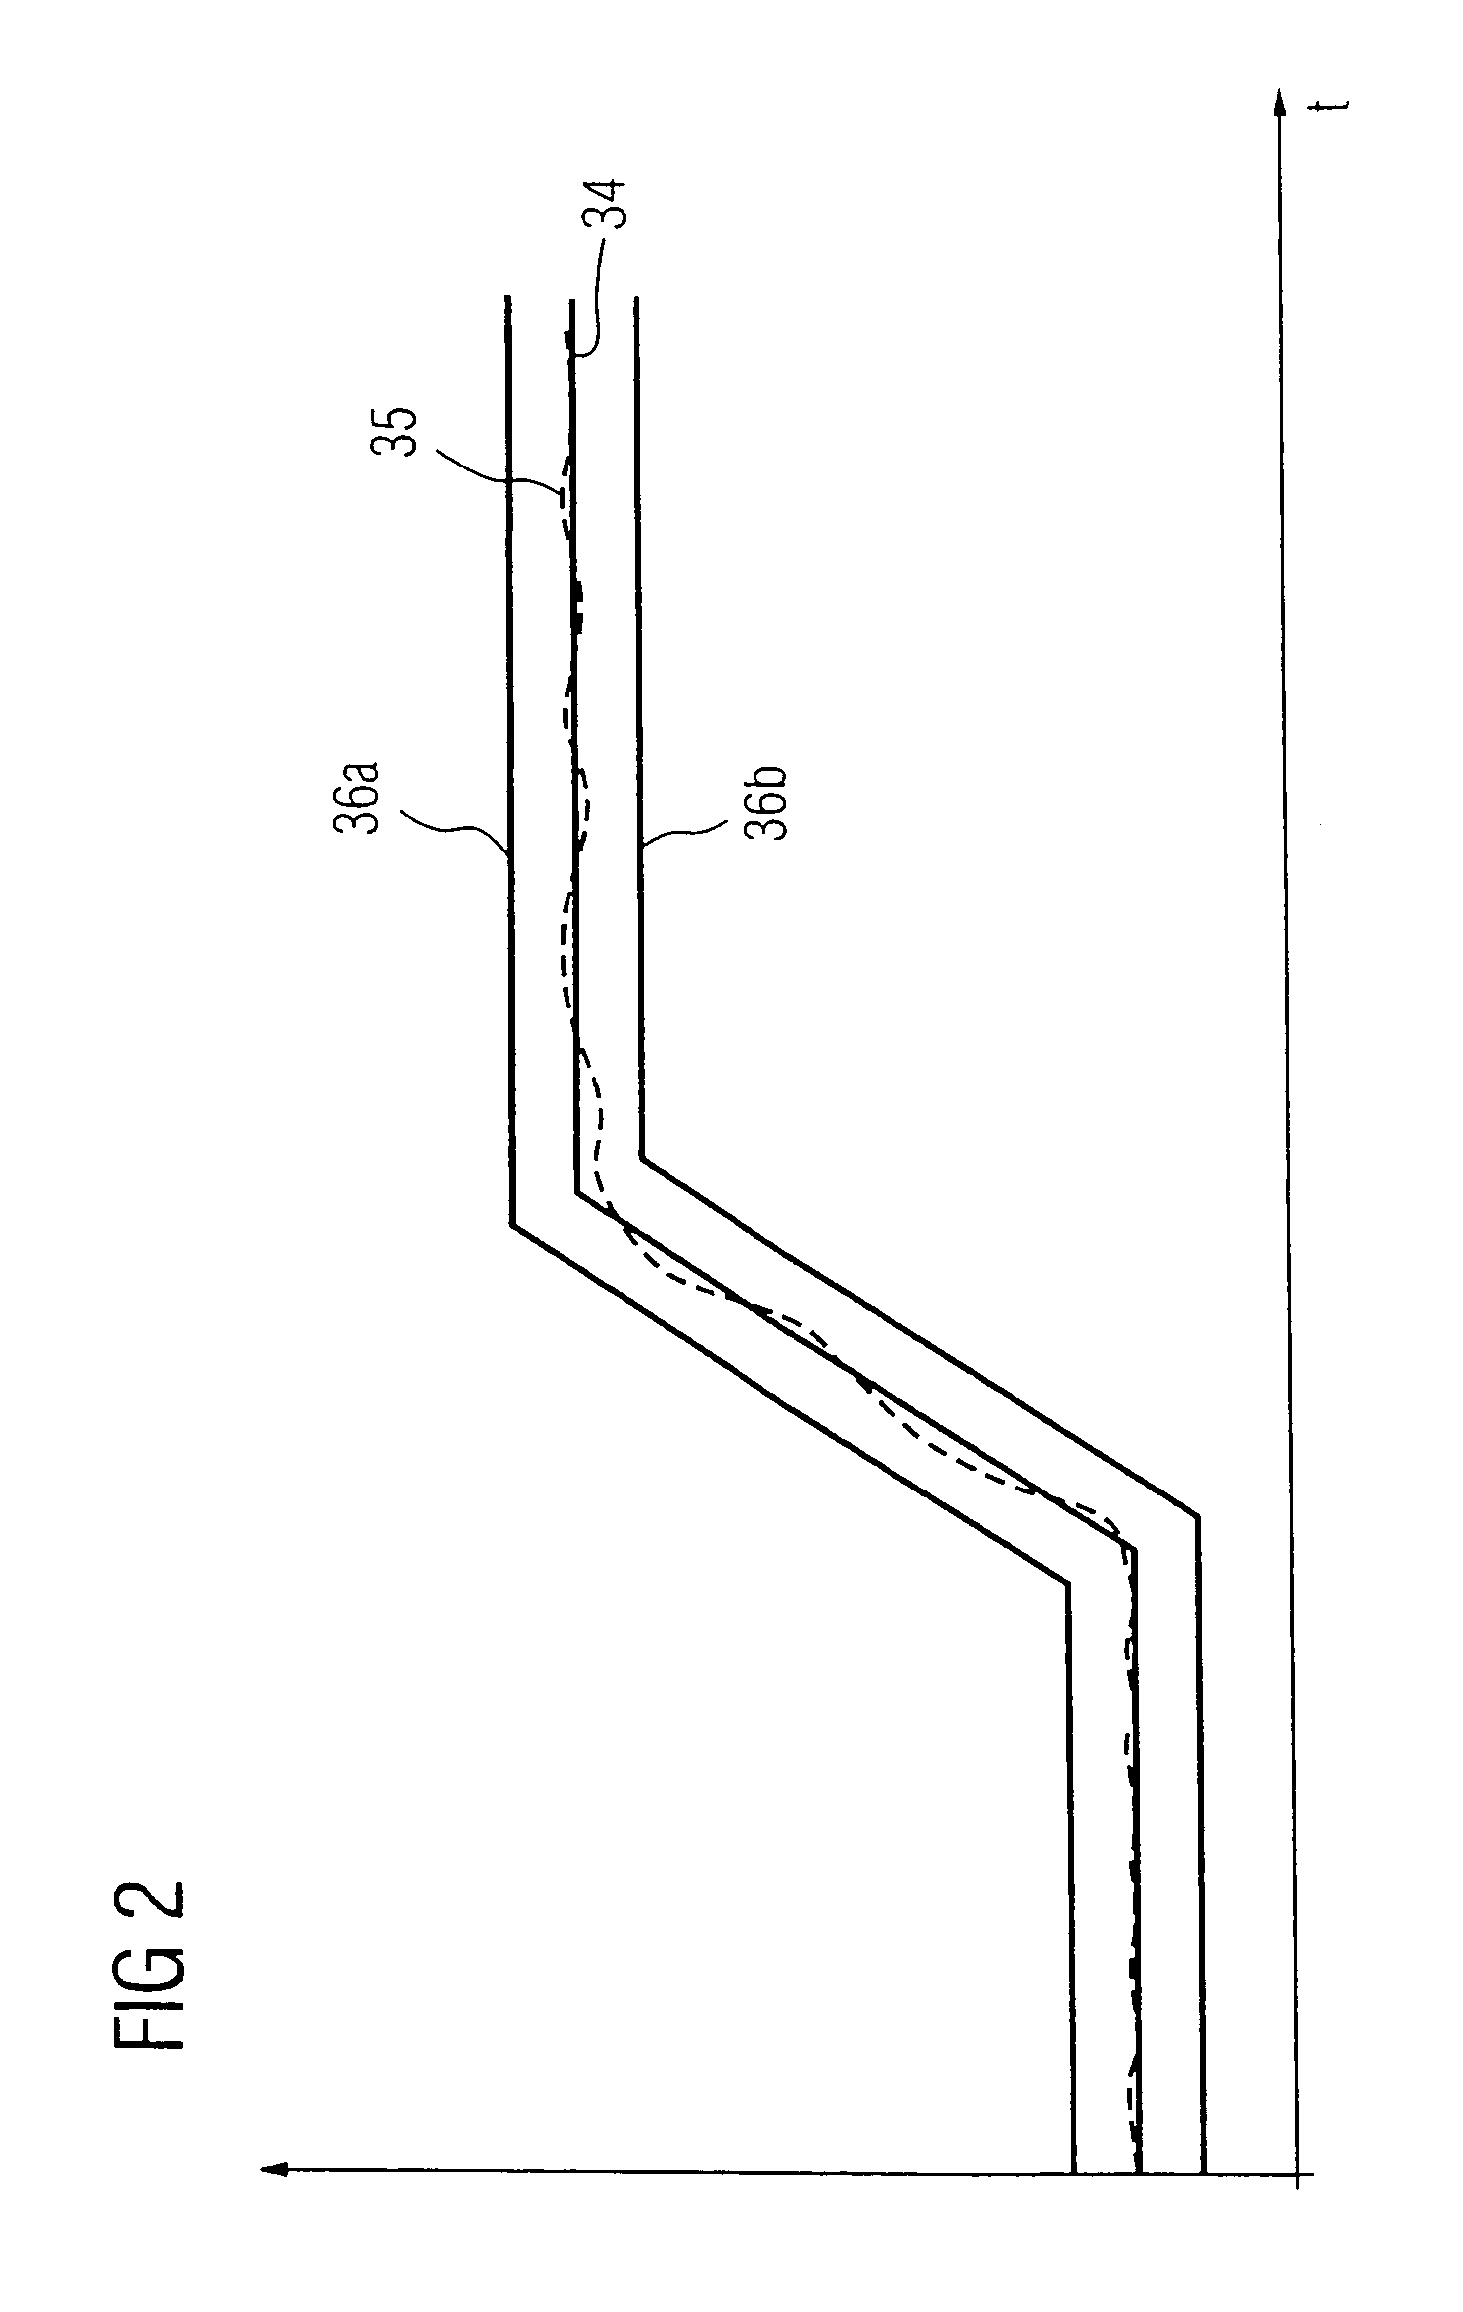 Device for controlling drives in machine tools or production machines